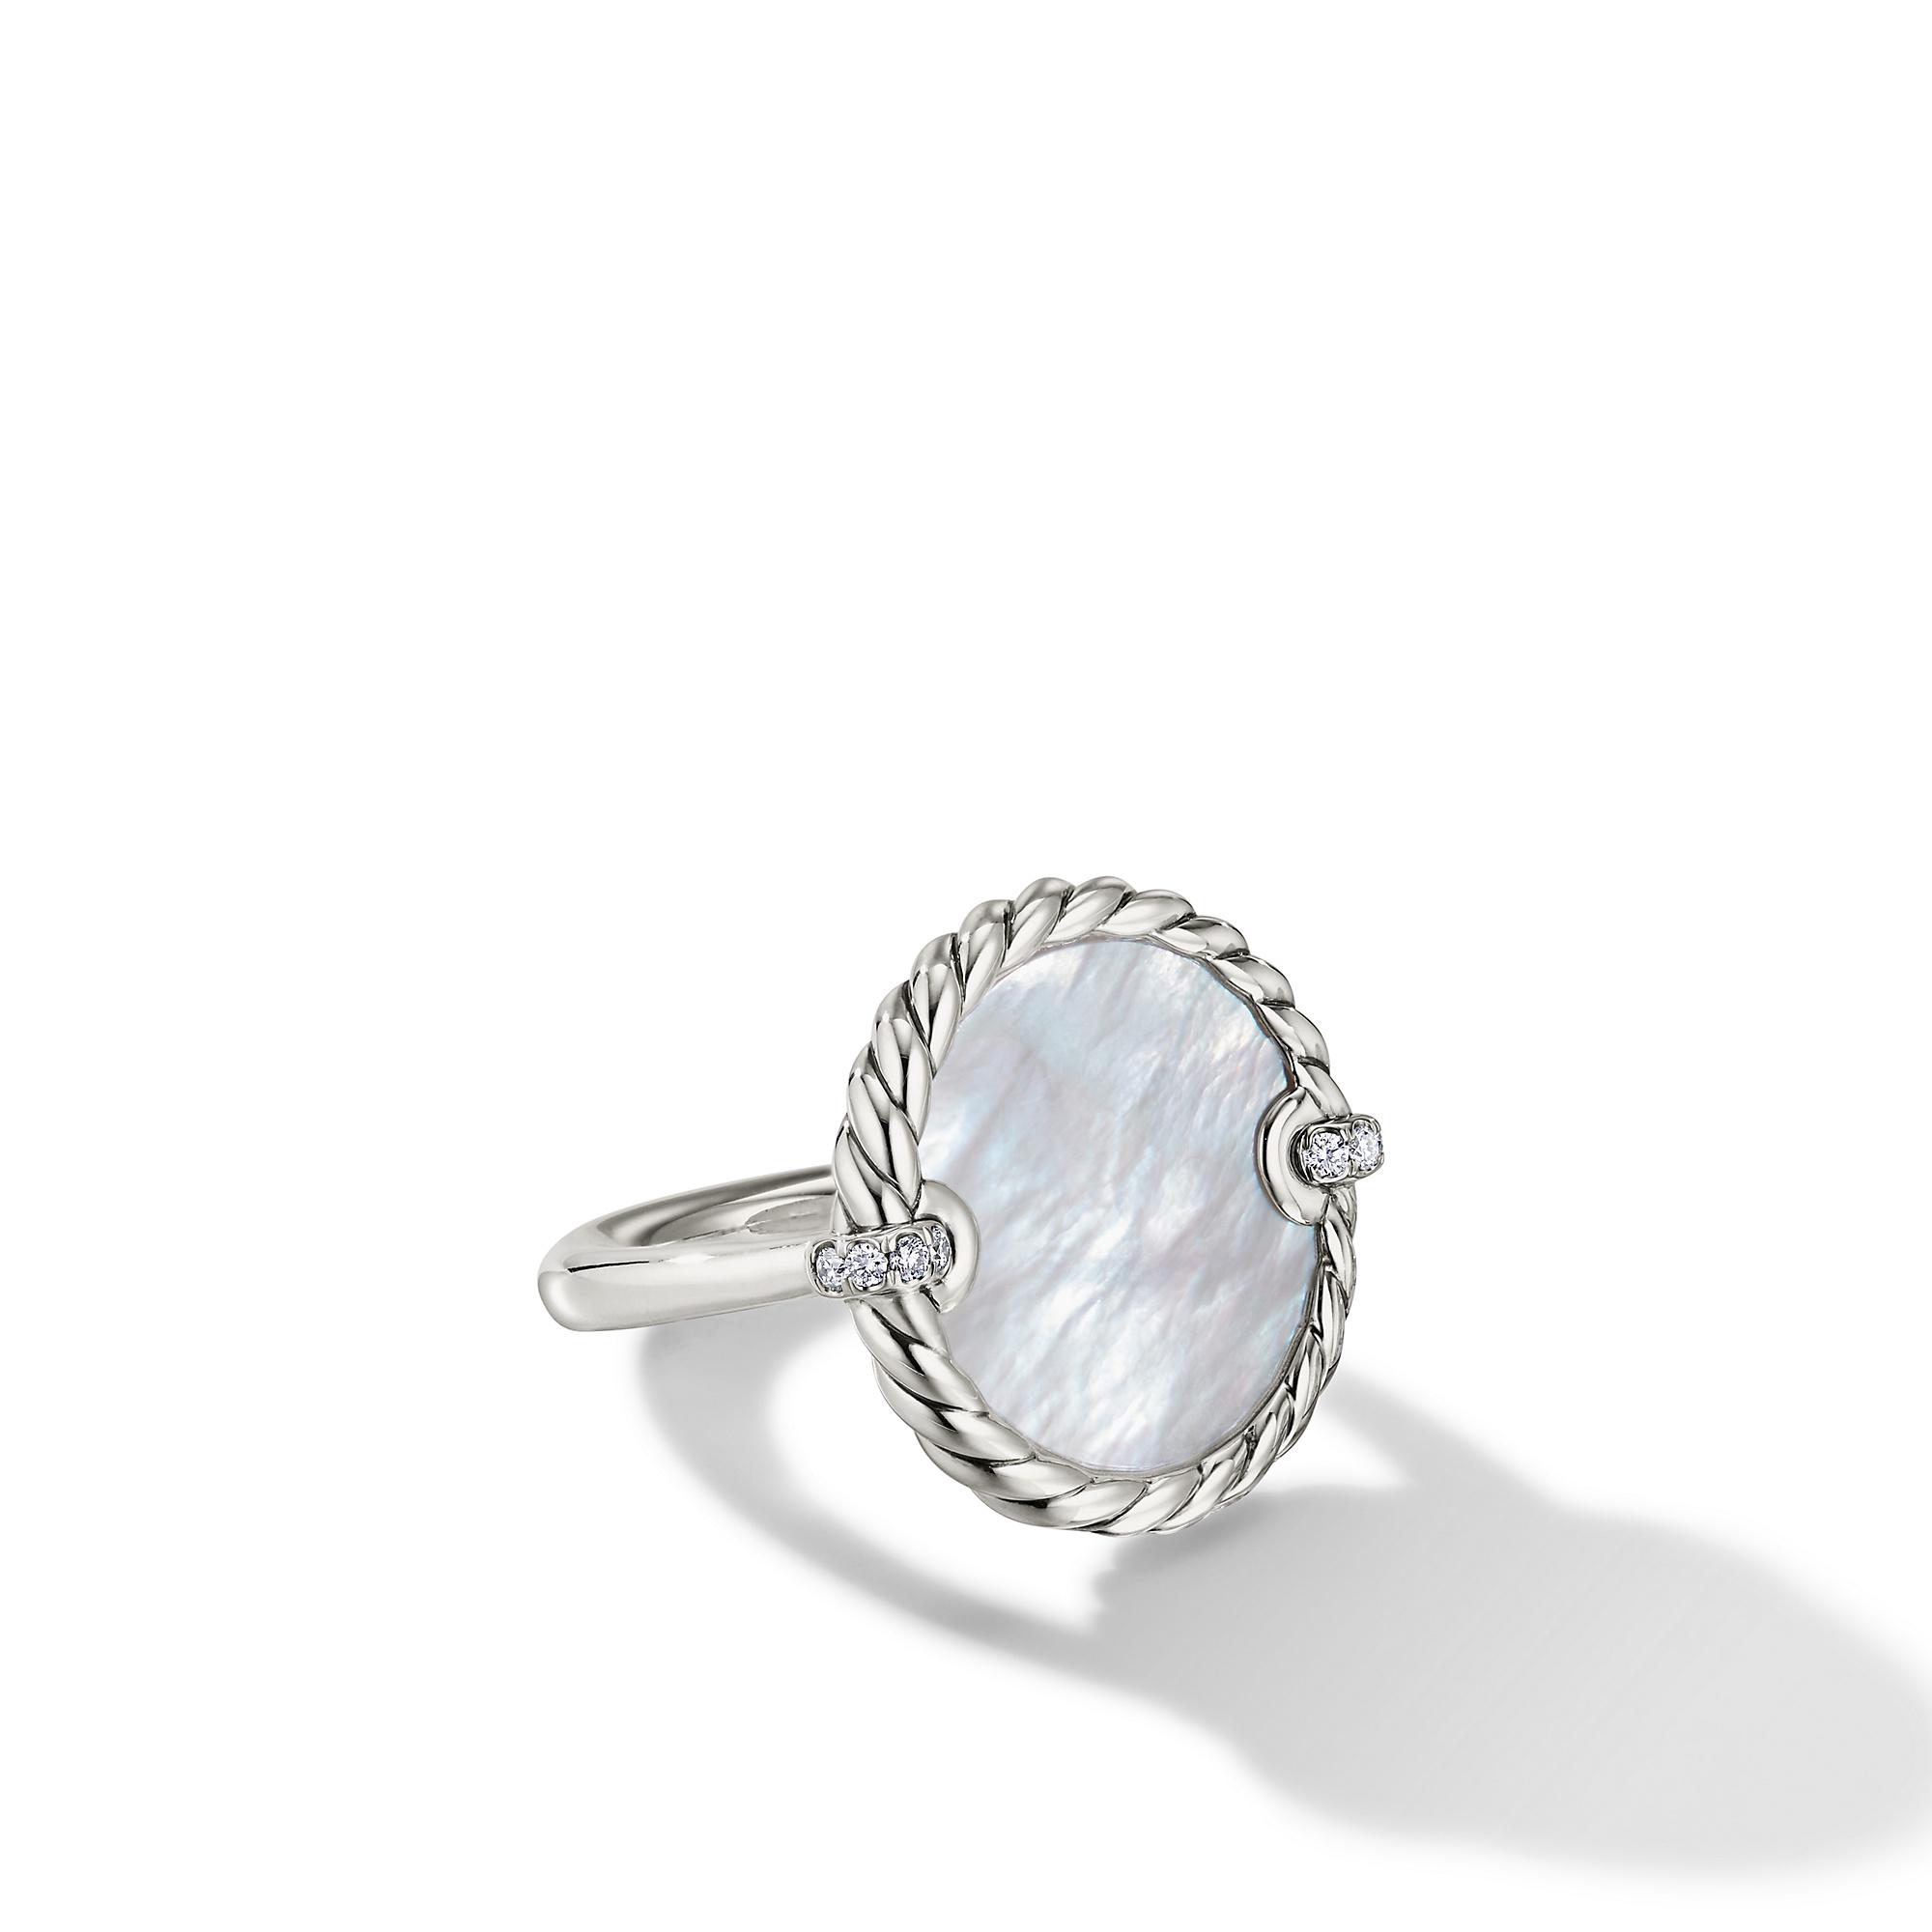 David Yurman DY Elements Ring with Mother of Pearl and Pave Diamonds, size 7